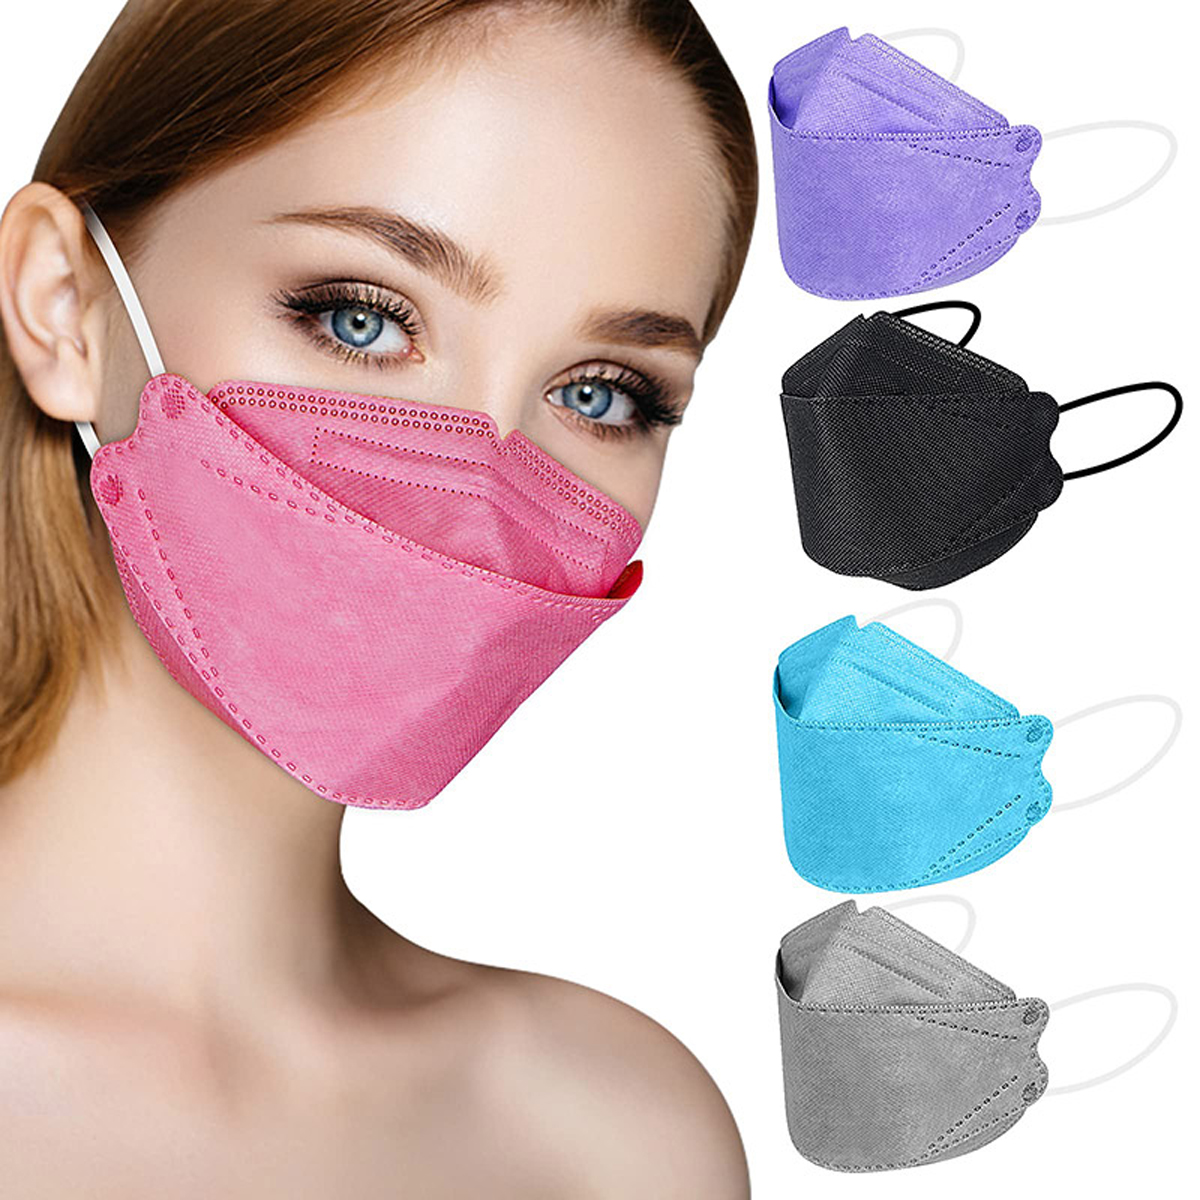 Fish-Shaped Protective KF94 Mask (Multiple Colors)